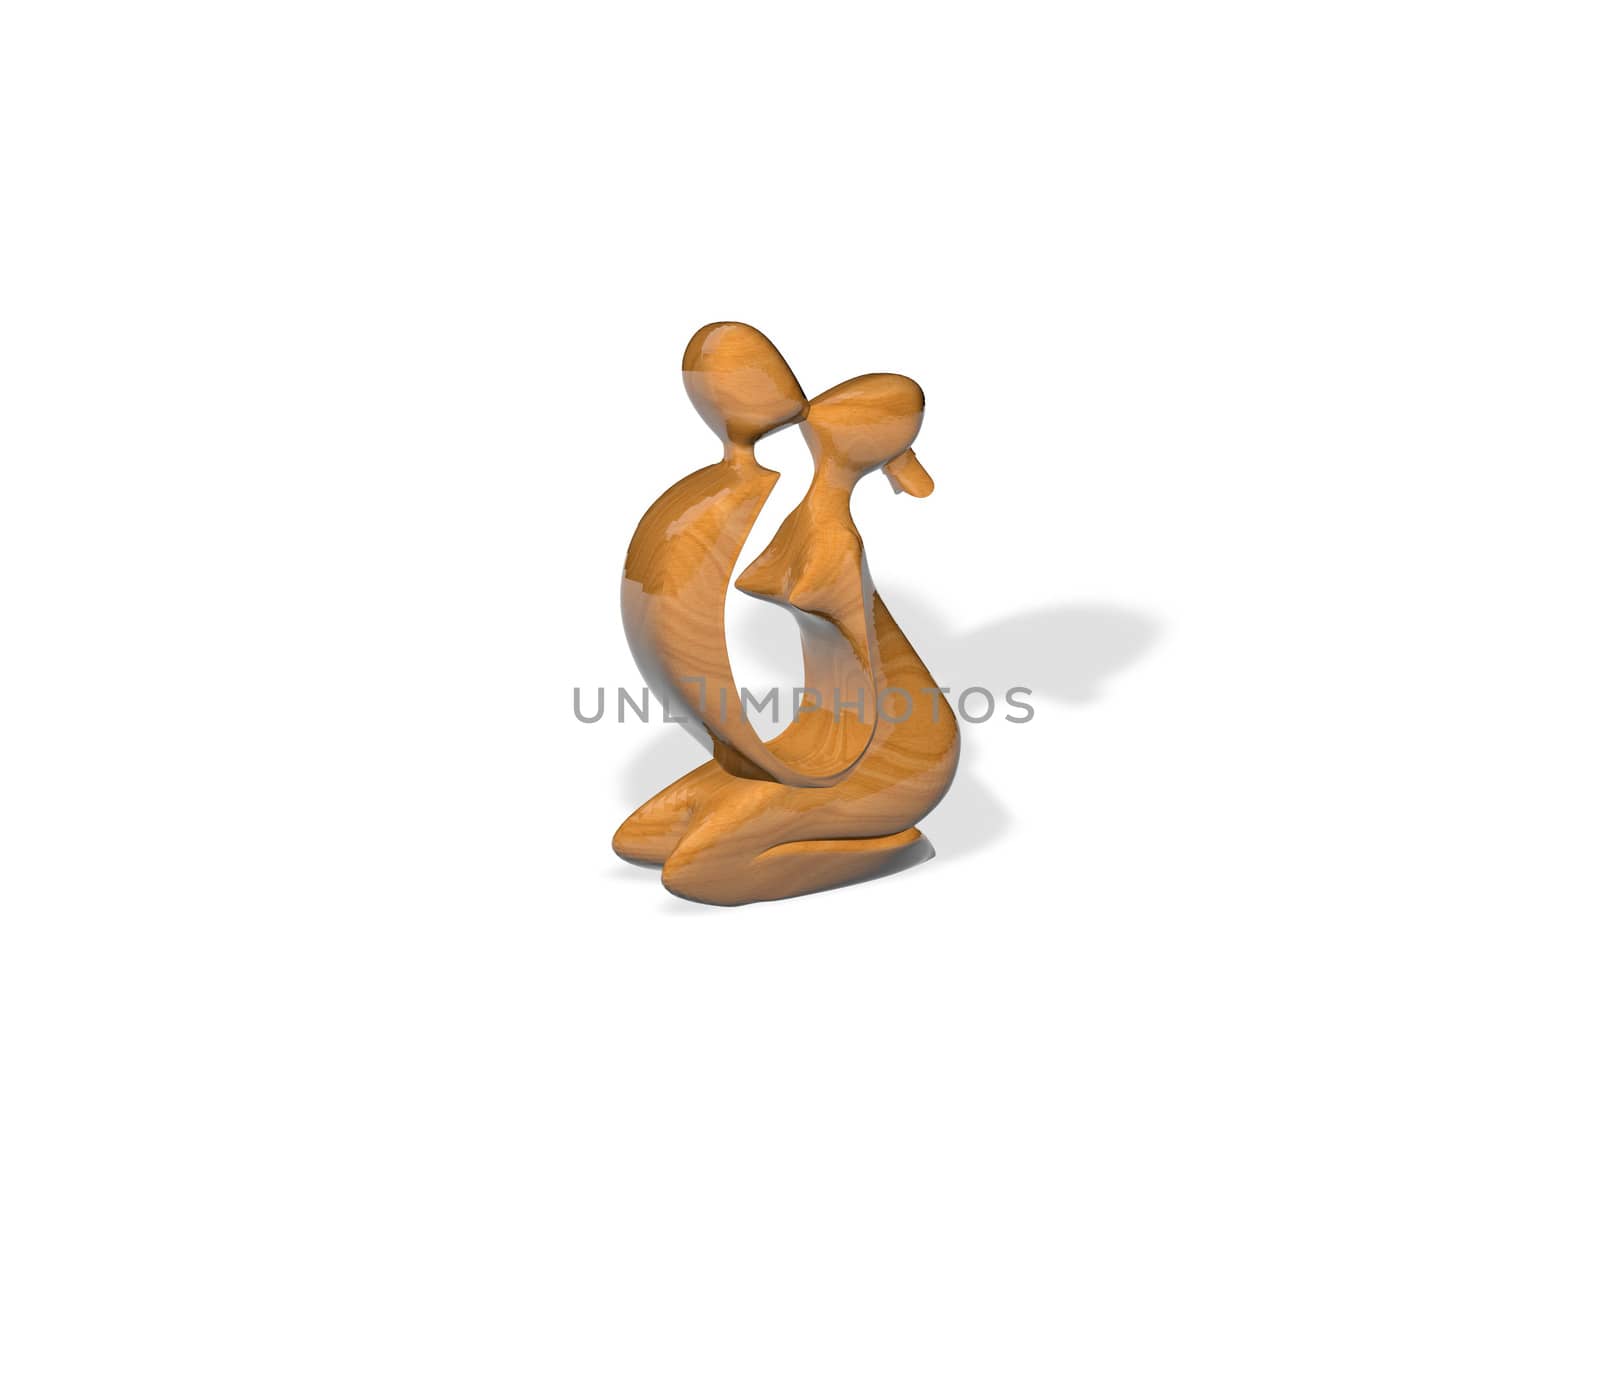 Wood Figurine Man Whit Woman Together by xizang